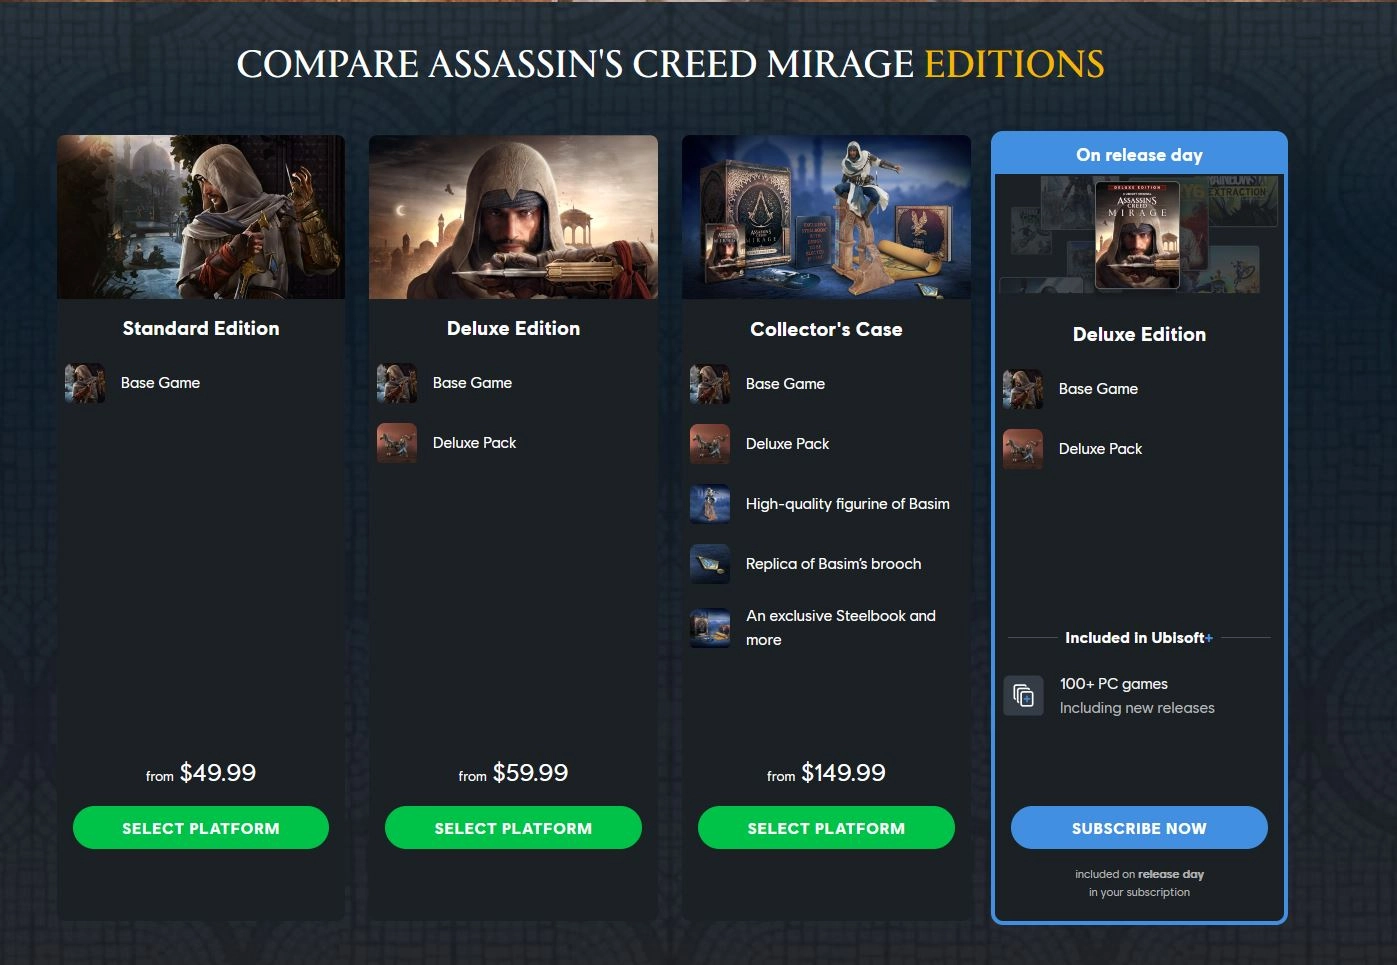 Pricing details revealed for Assassin's Creed Mirage